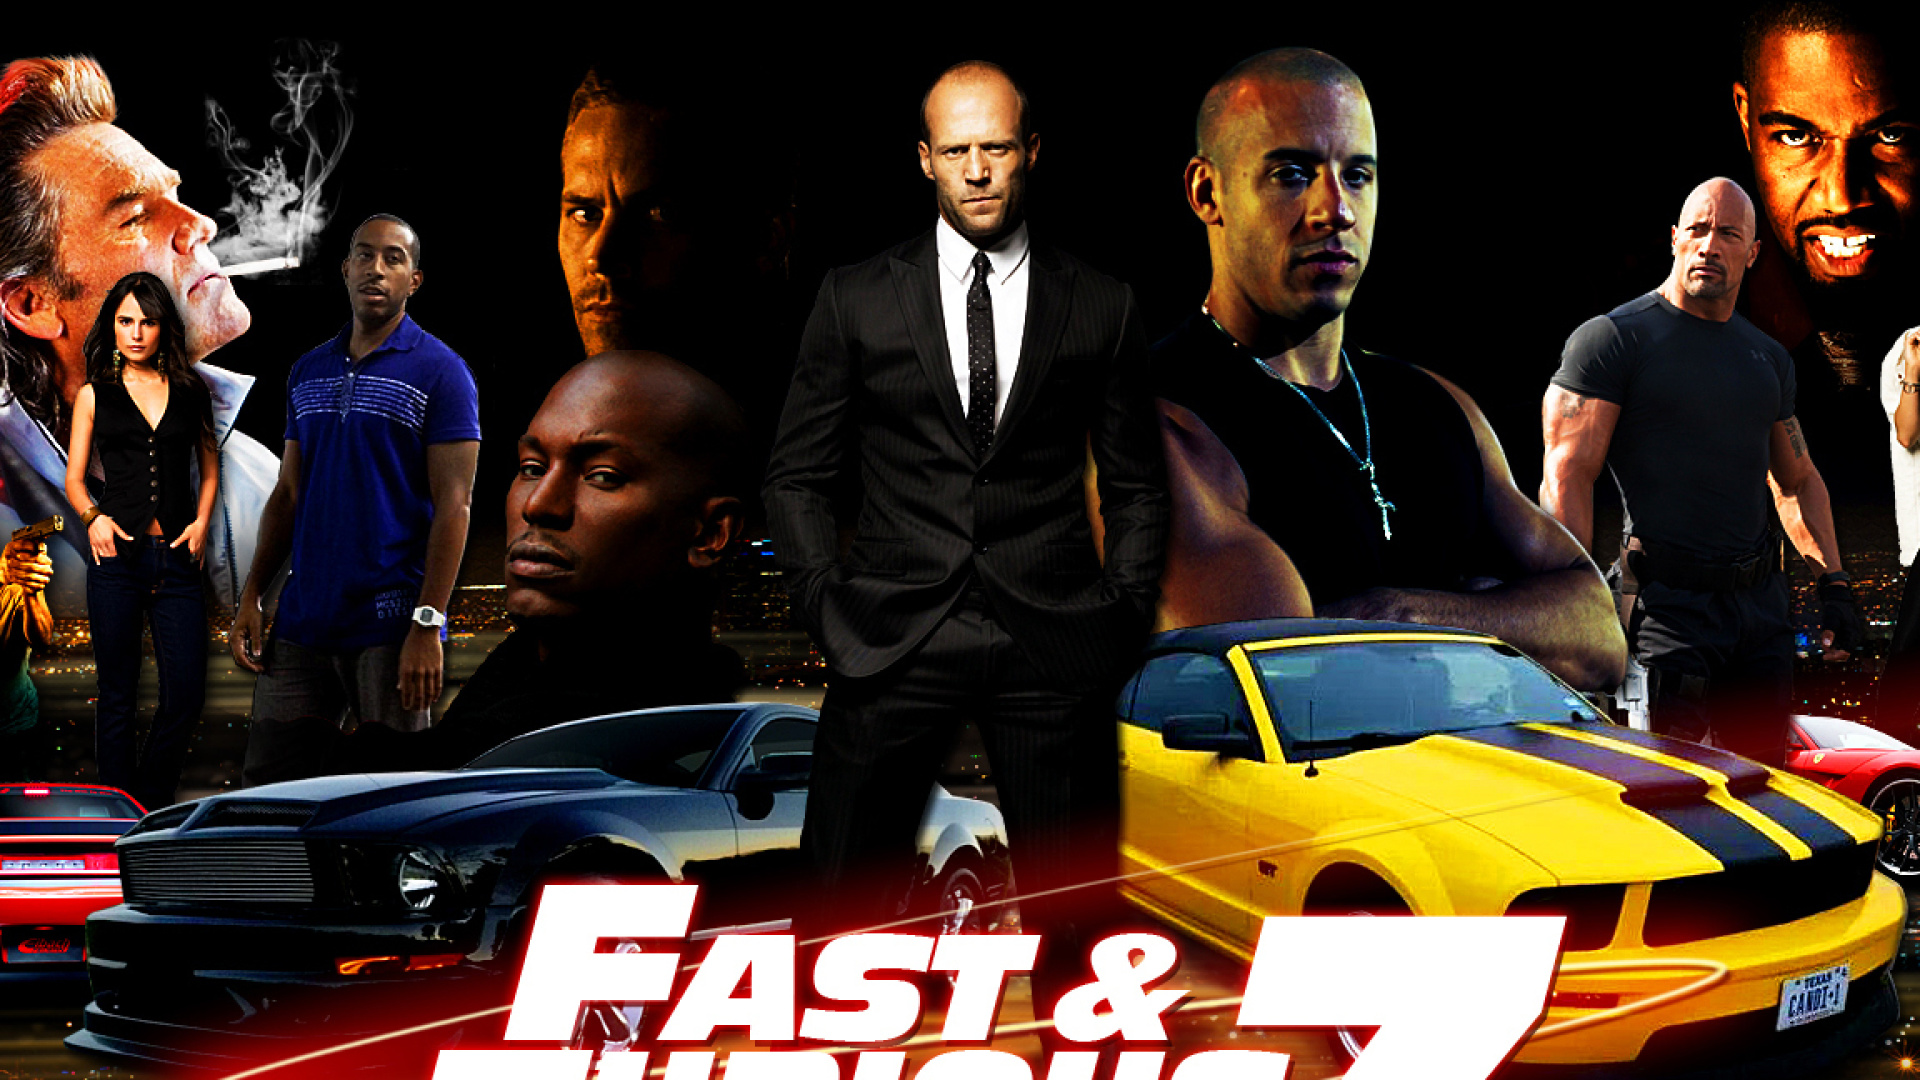 Fast and Furious 7 Movie wallpaper 1920x1080